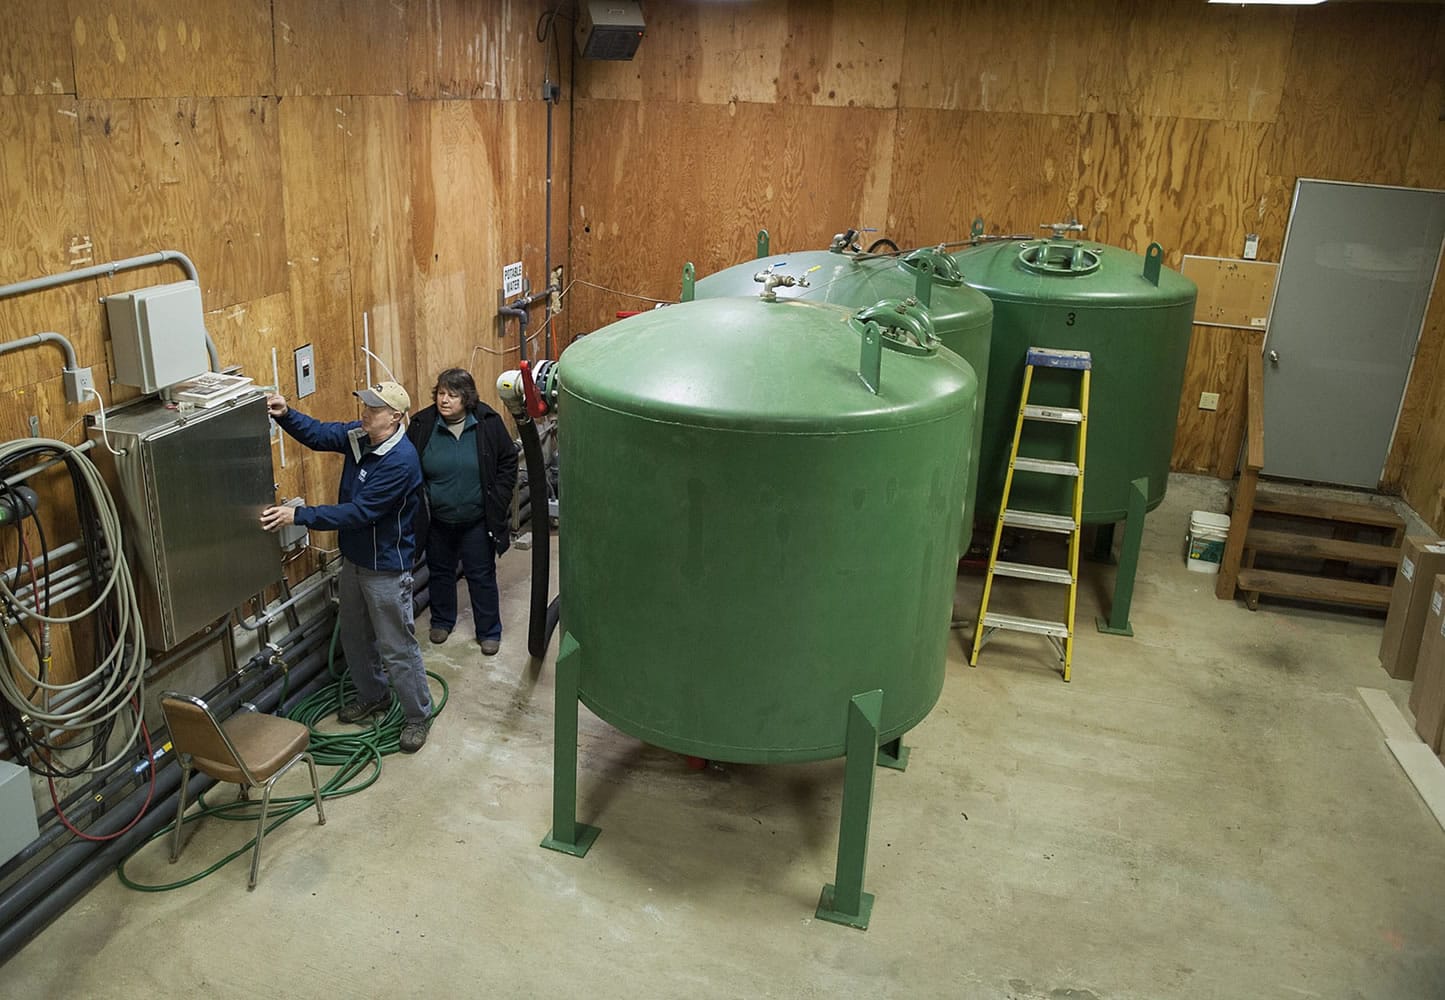 Richard Read, senior environmental scientist for EA Engineering, Science and Technology Inc., left, joins Judy Smith of the Environmental Protection Agency as they check out the ion exchange system that removes hexavalent chromium from water Friday in Hazel Dell.